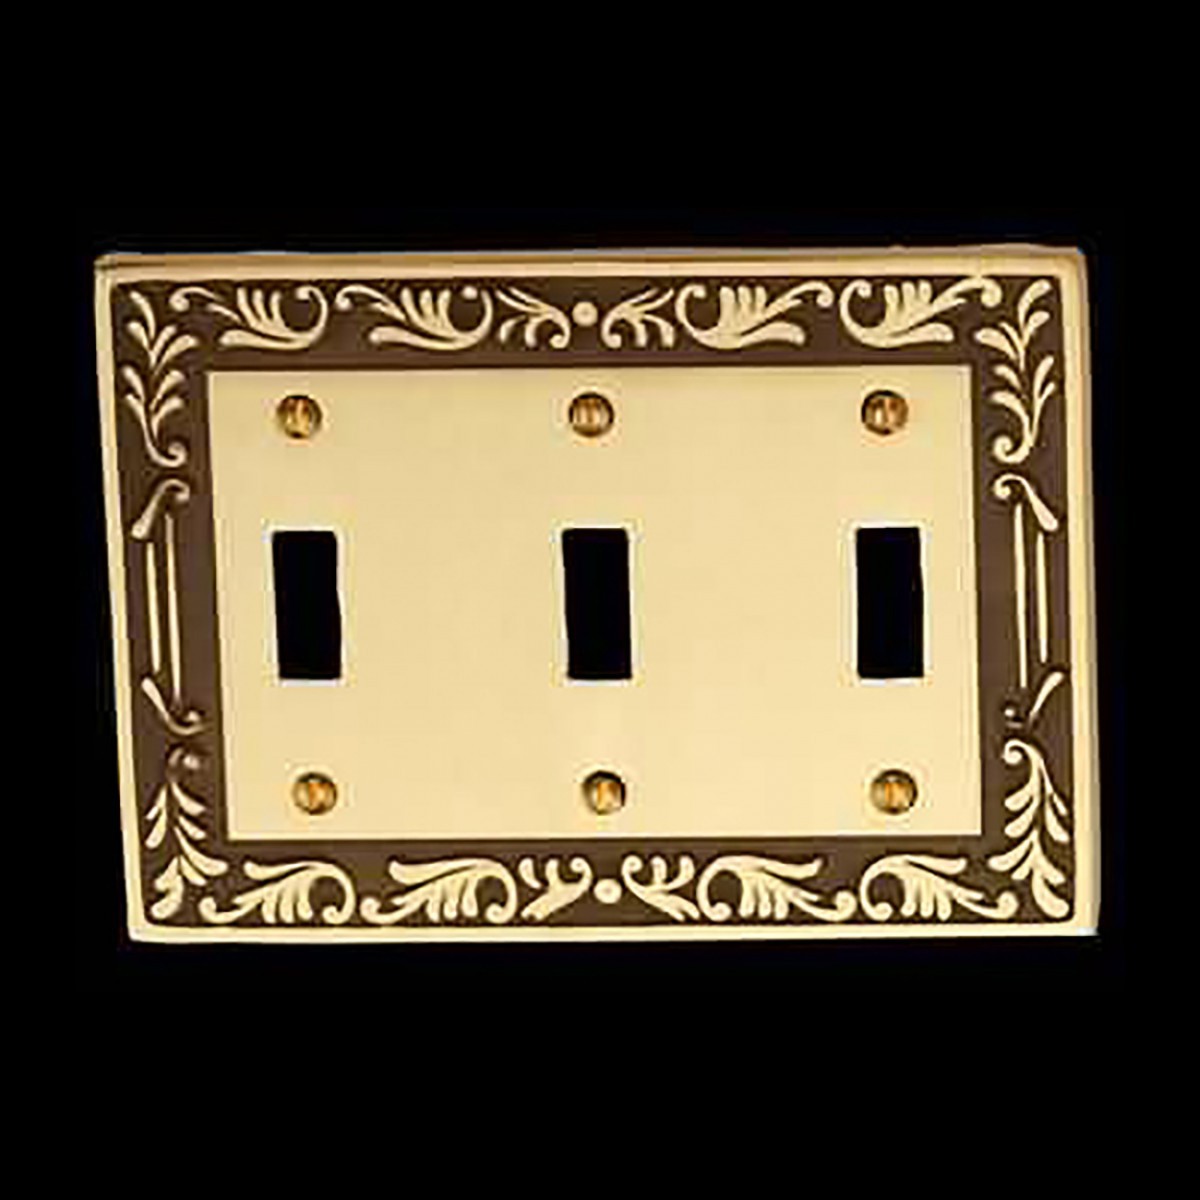 Renovators Supply 4 Victorian Switch Plate Triple Toggle Antique Solid Brass